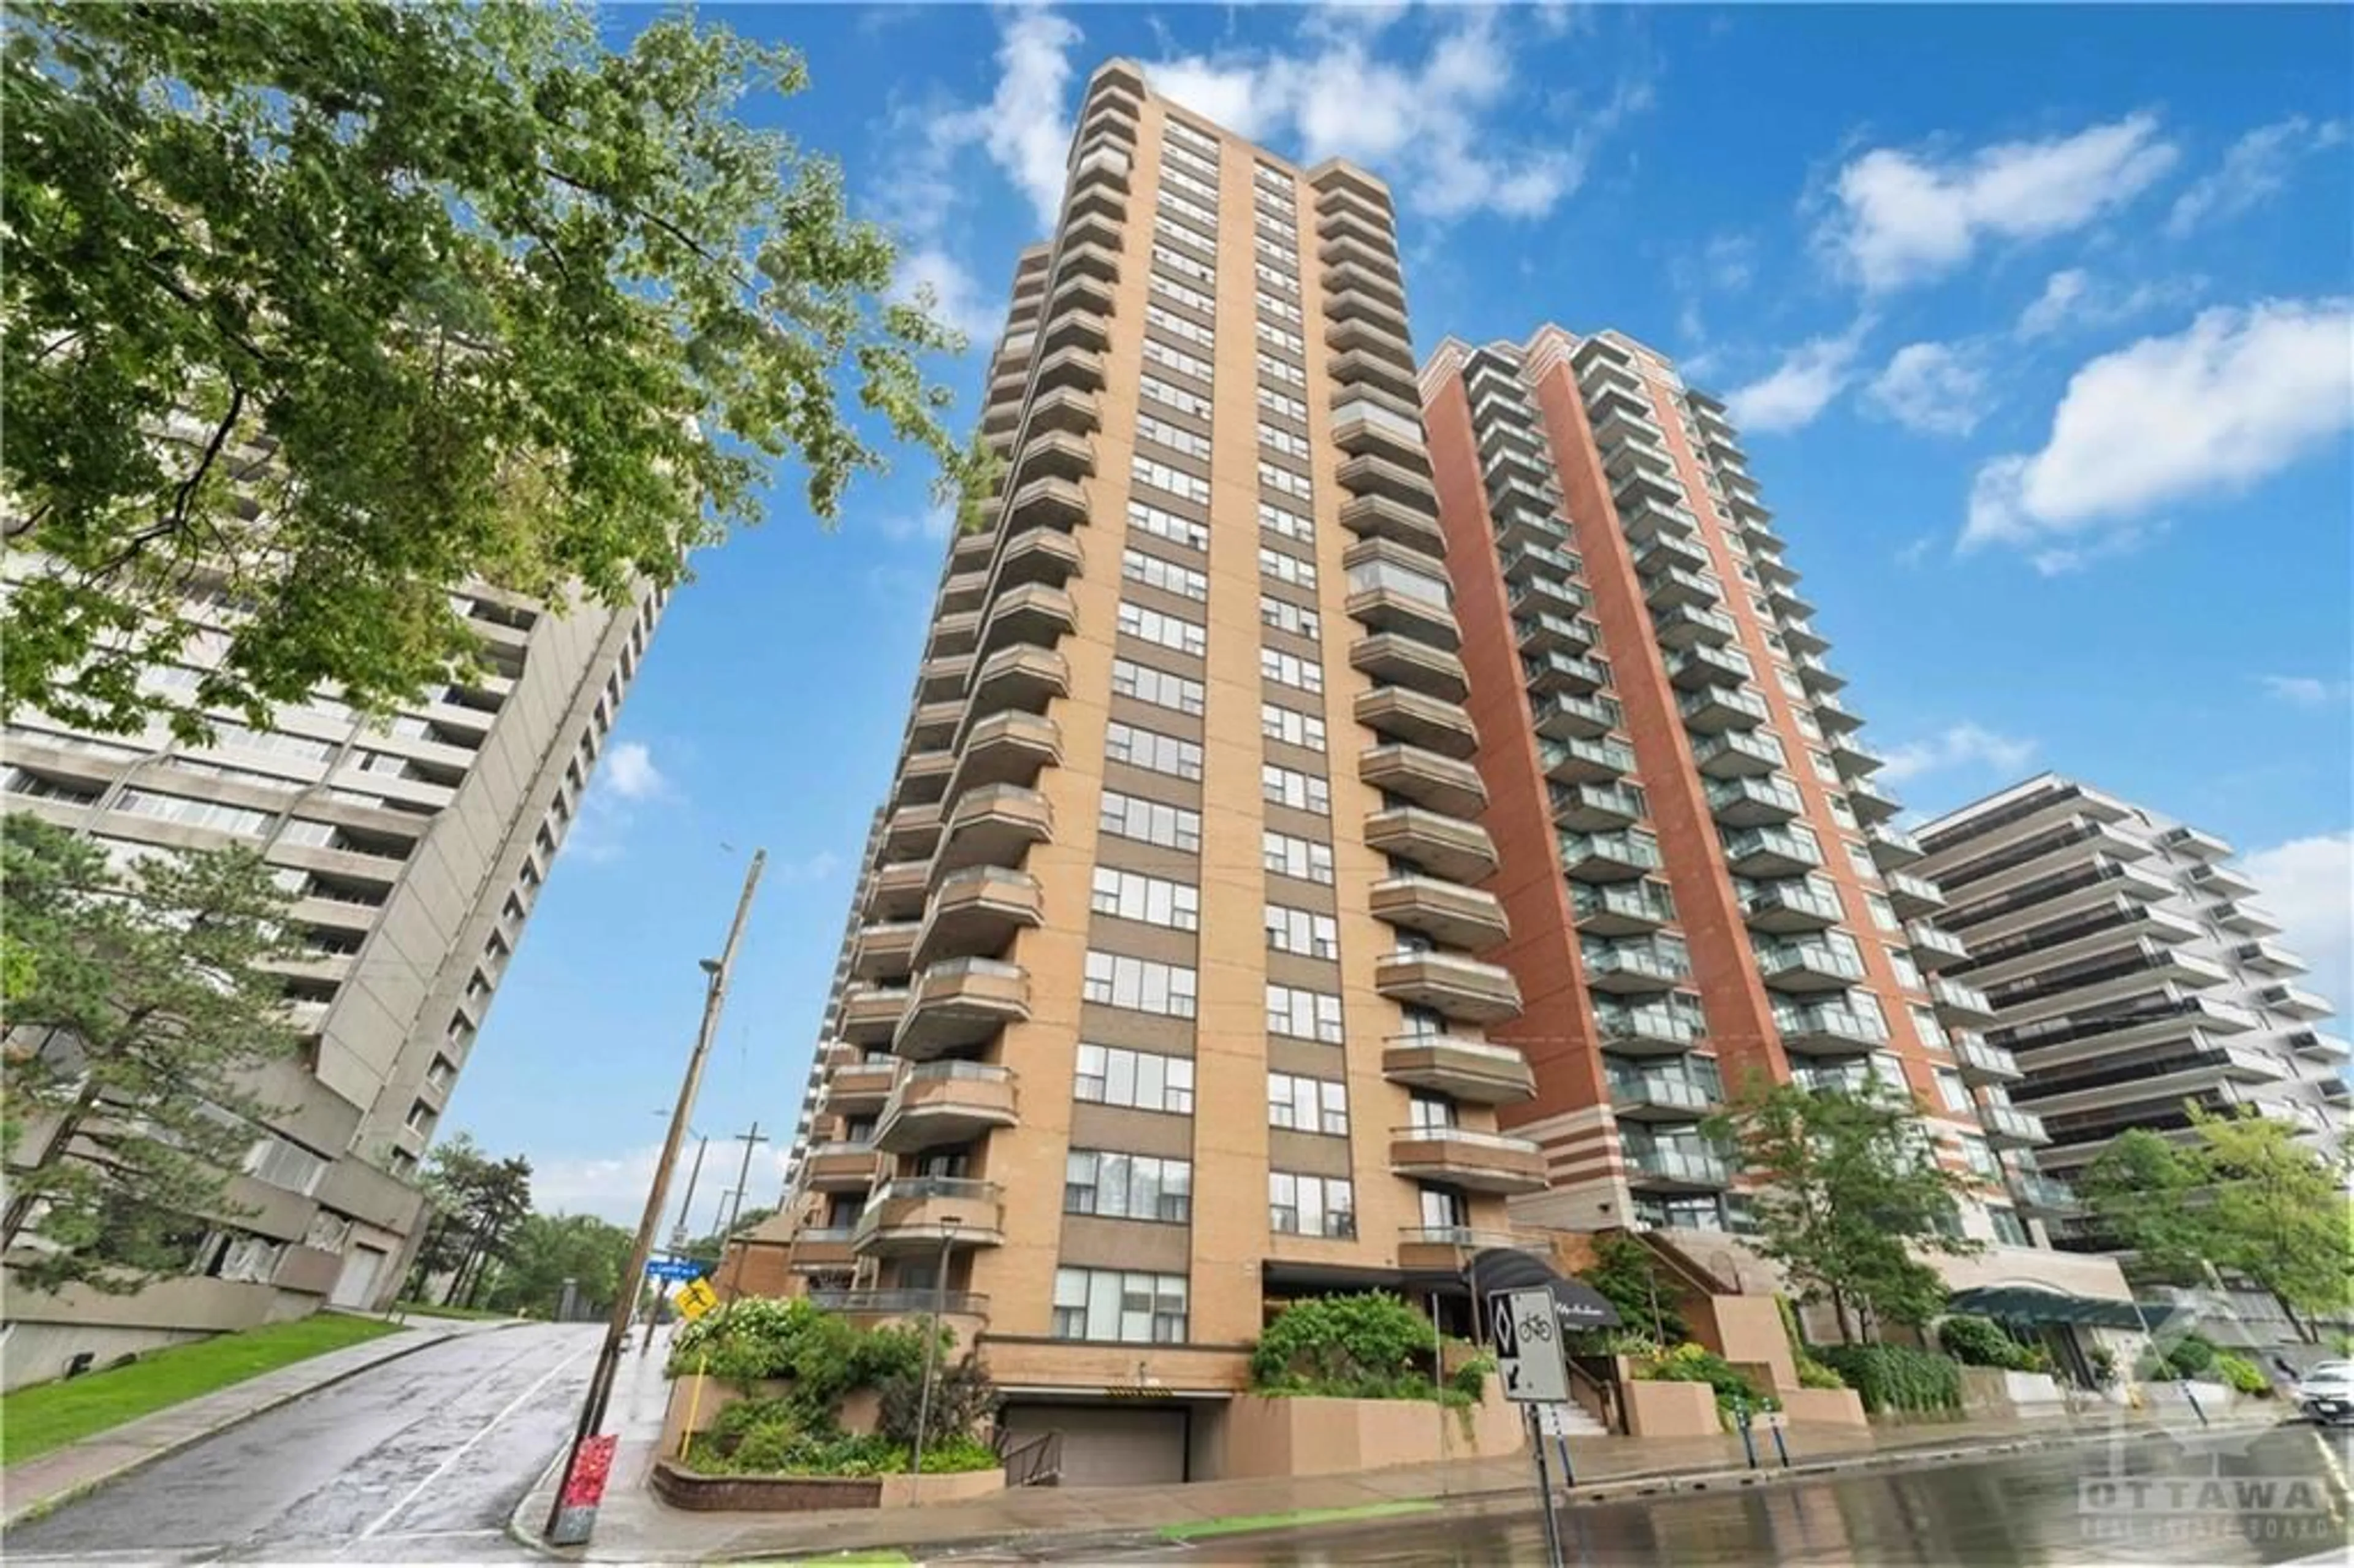 A pic from exterior of the house or condo for 556 LAURIER Ave #1805, Ottawa Ontario K1R 7X2